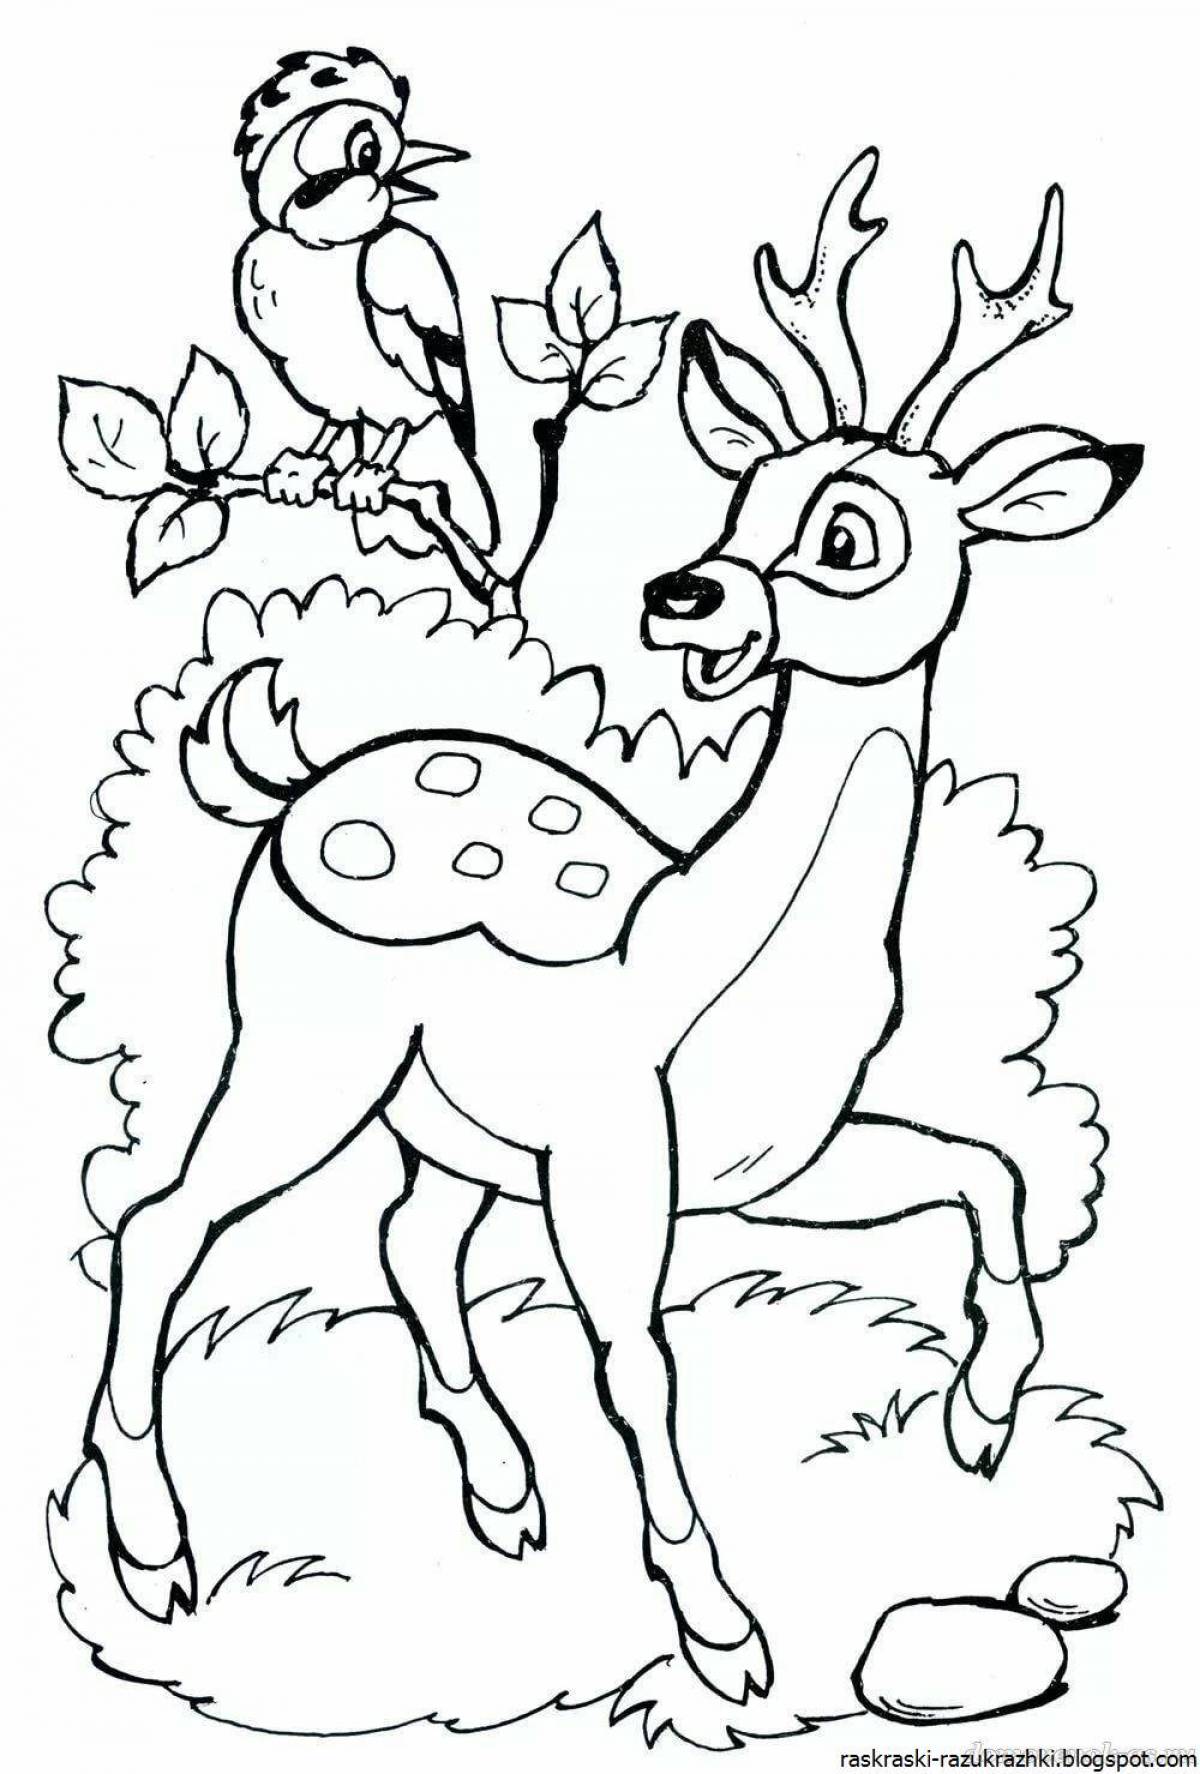 Colour effect coloring book animals for children 5-6 years old